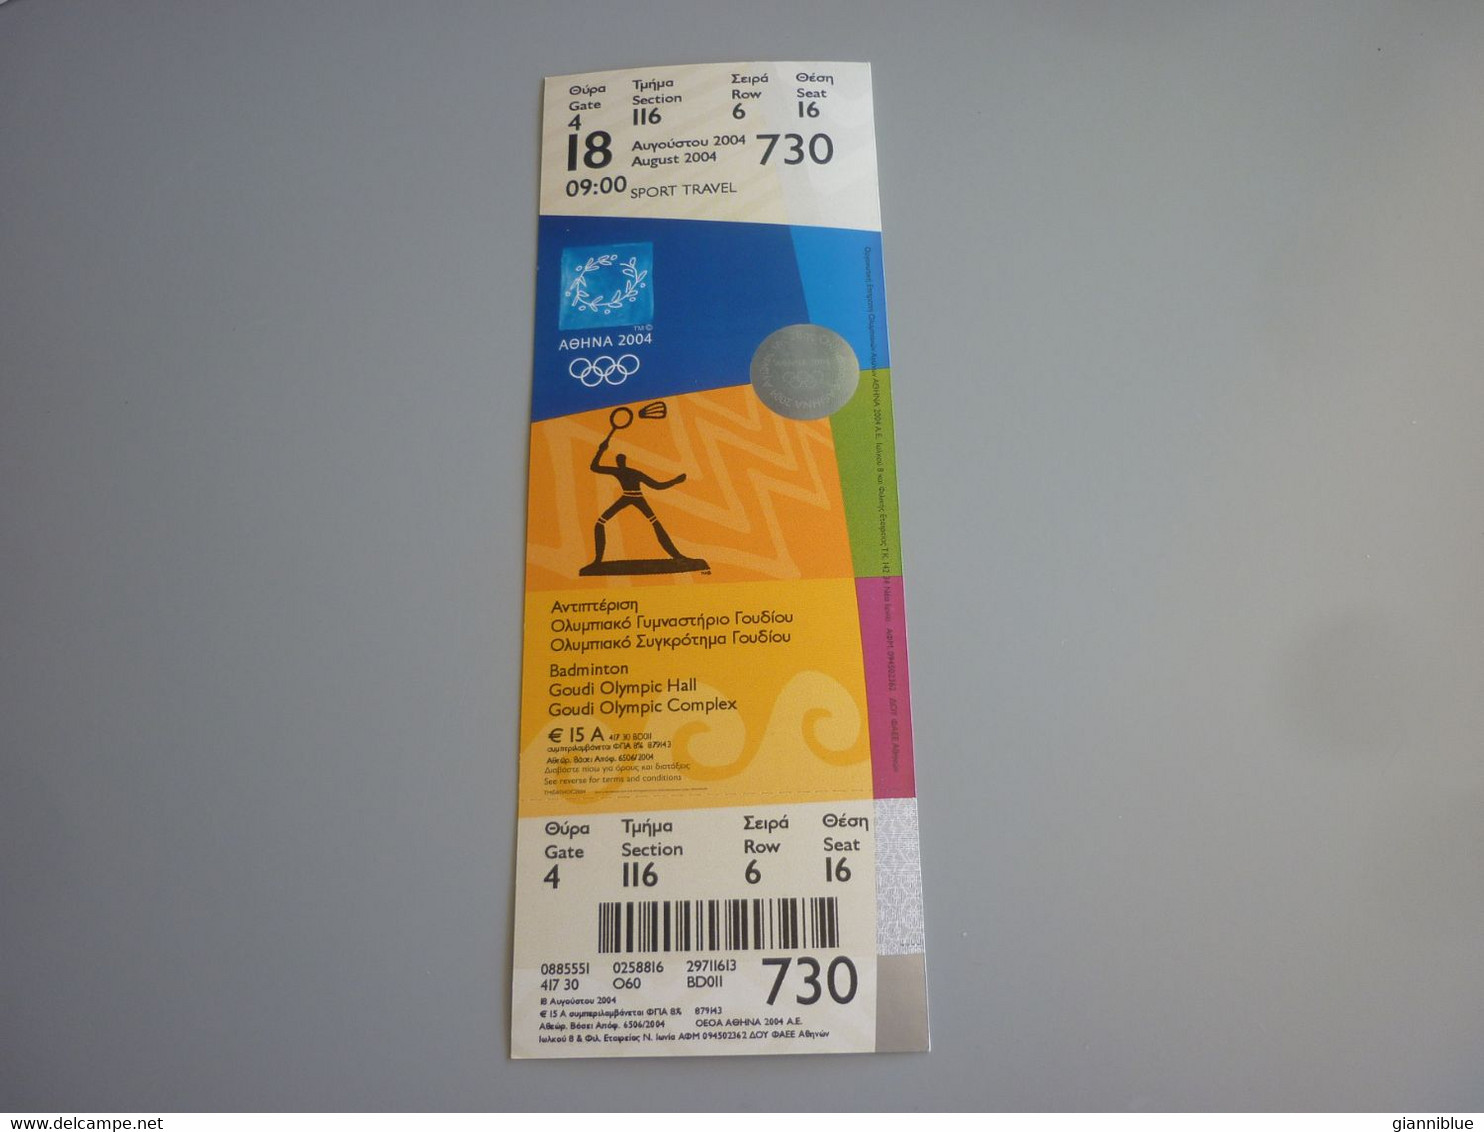 Badminton Athens 2004 Olympic Games Greece Greek Mint Unused Match Ticket Stub 18/08/2004 09:00 #730 - Apparel, Souvenirs & Other